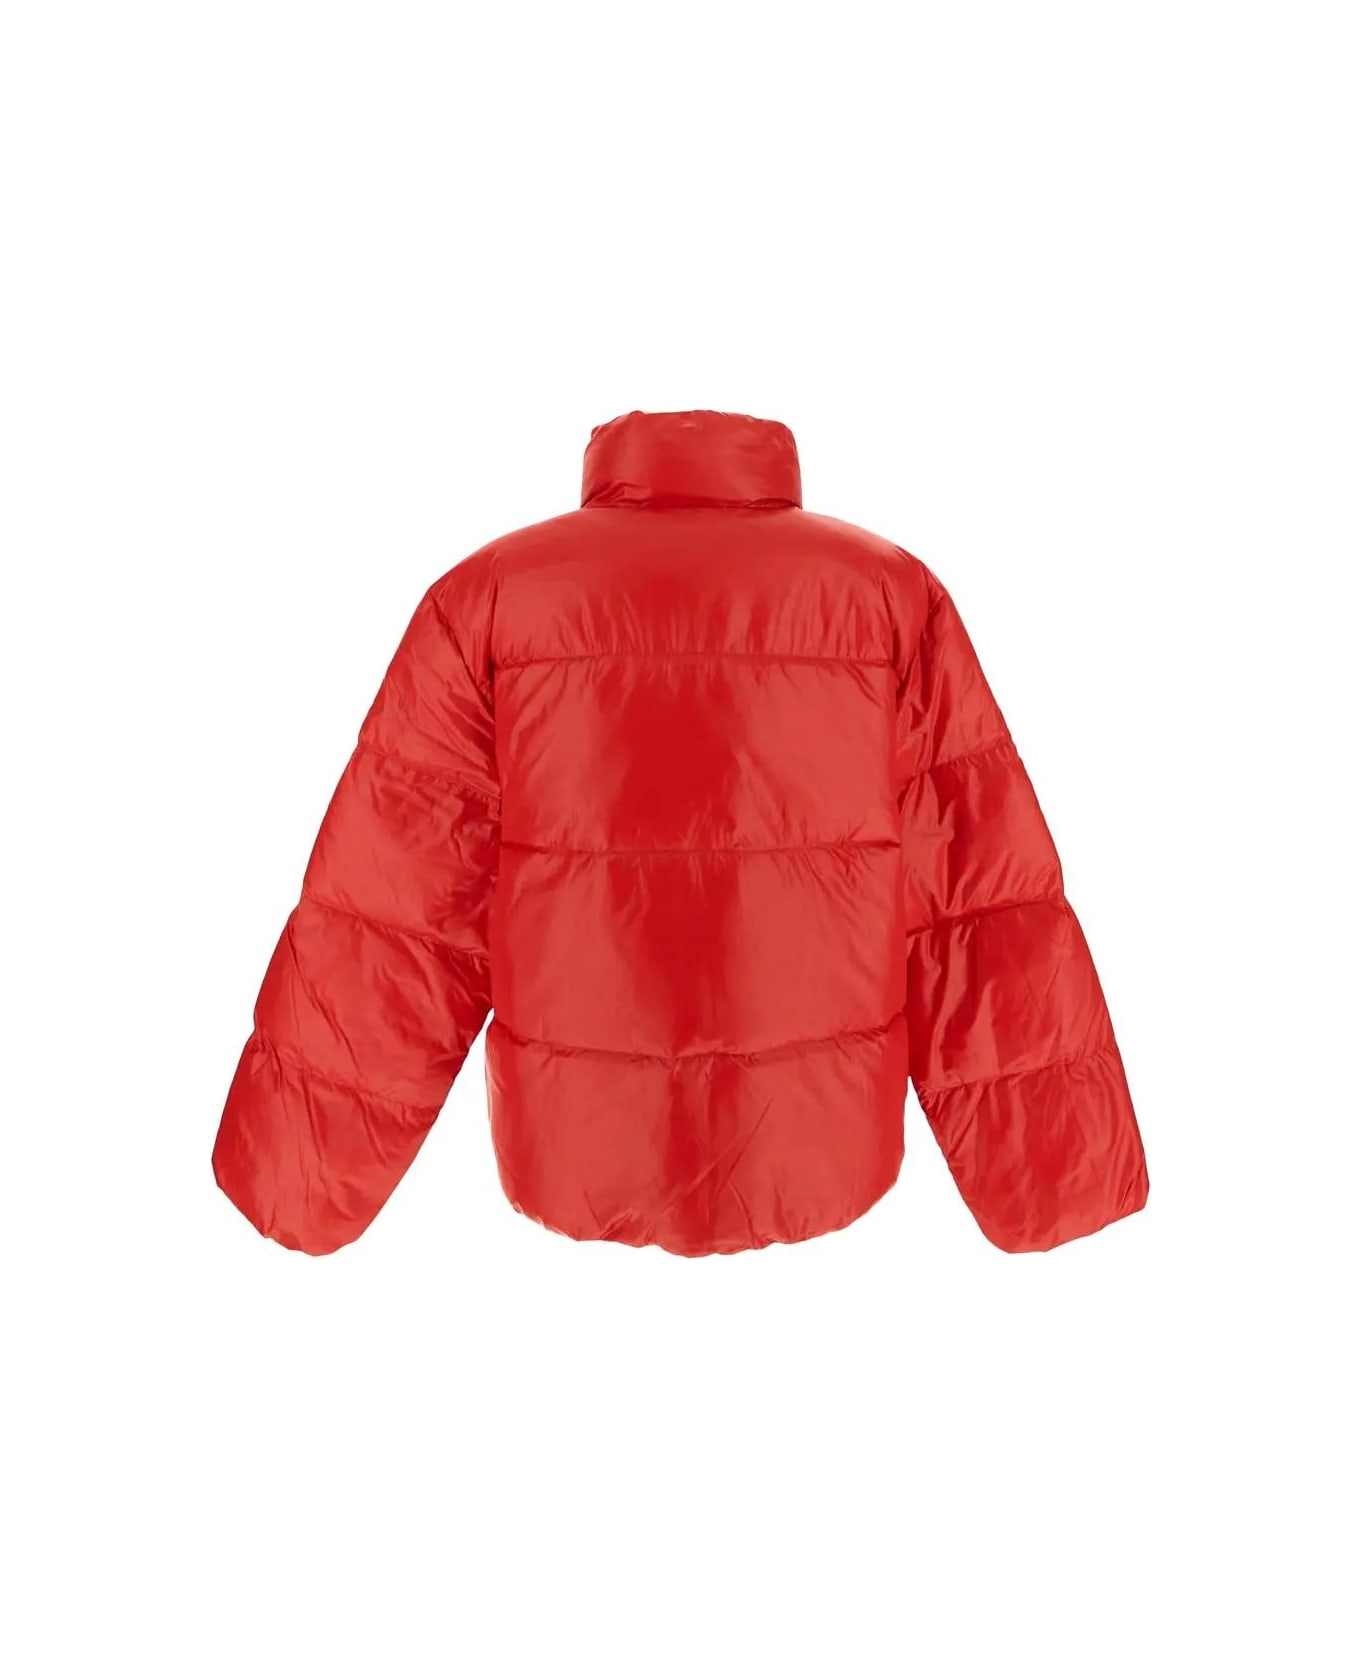 Duvetica Dima Down Jacket - Red